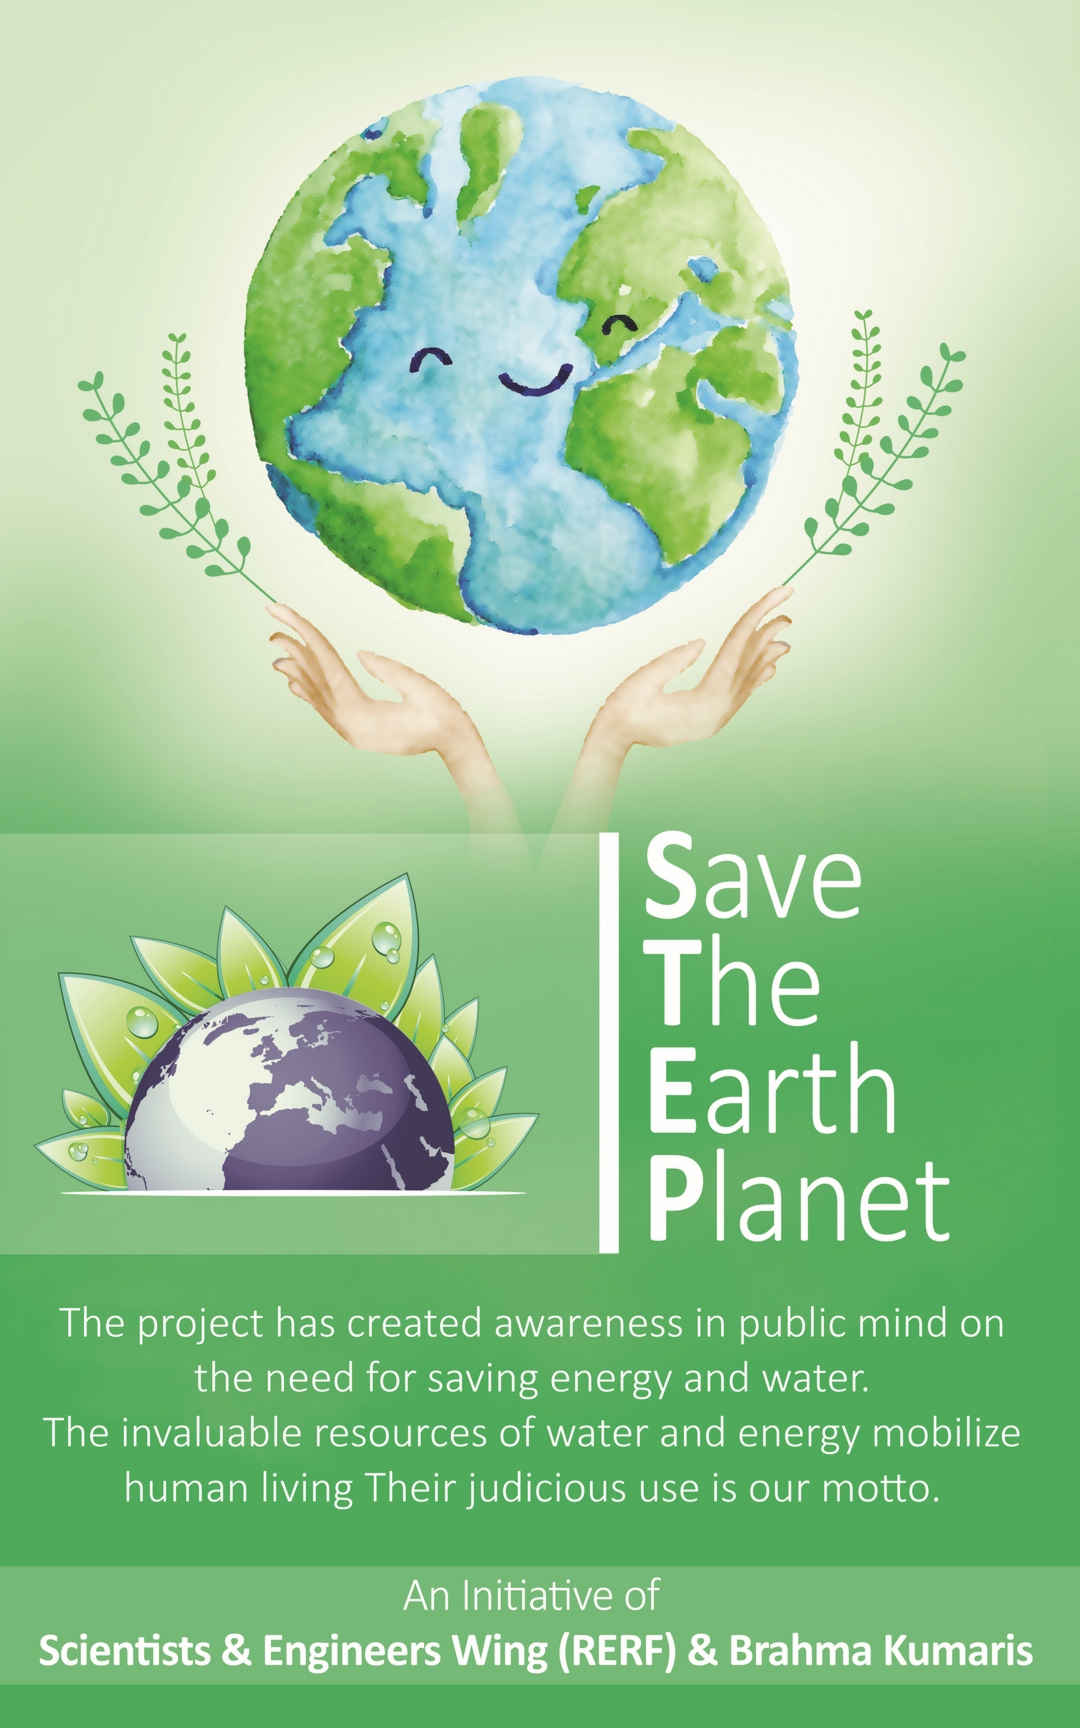 Save the earth planet